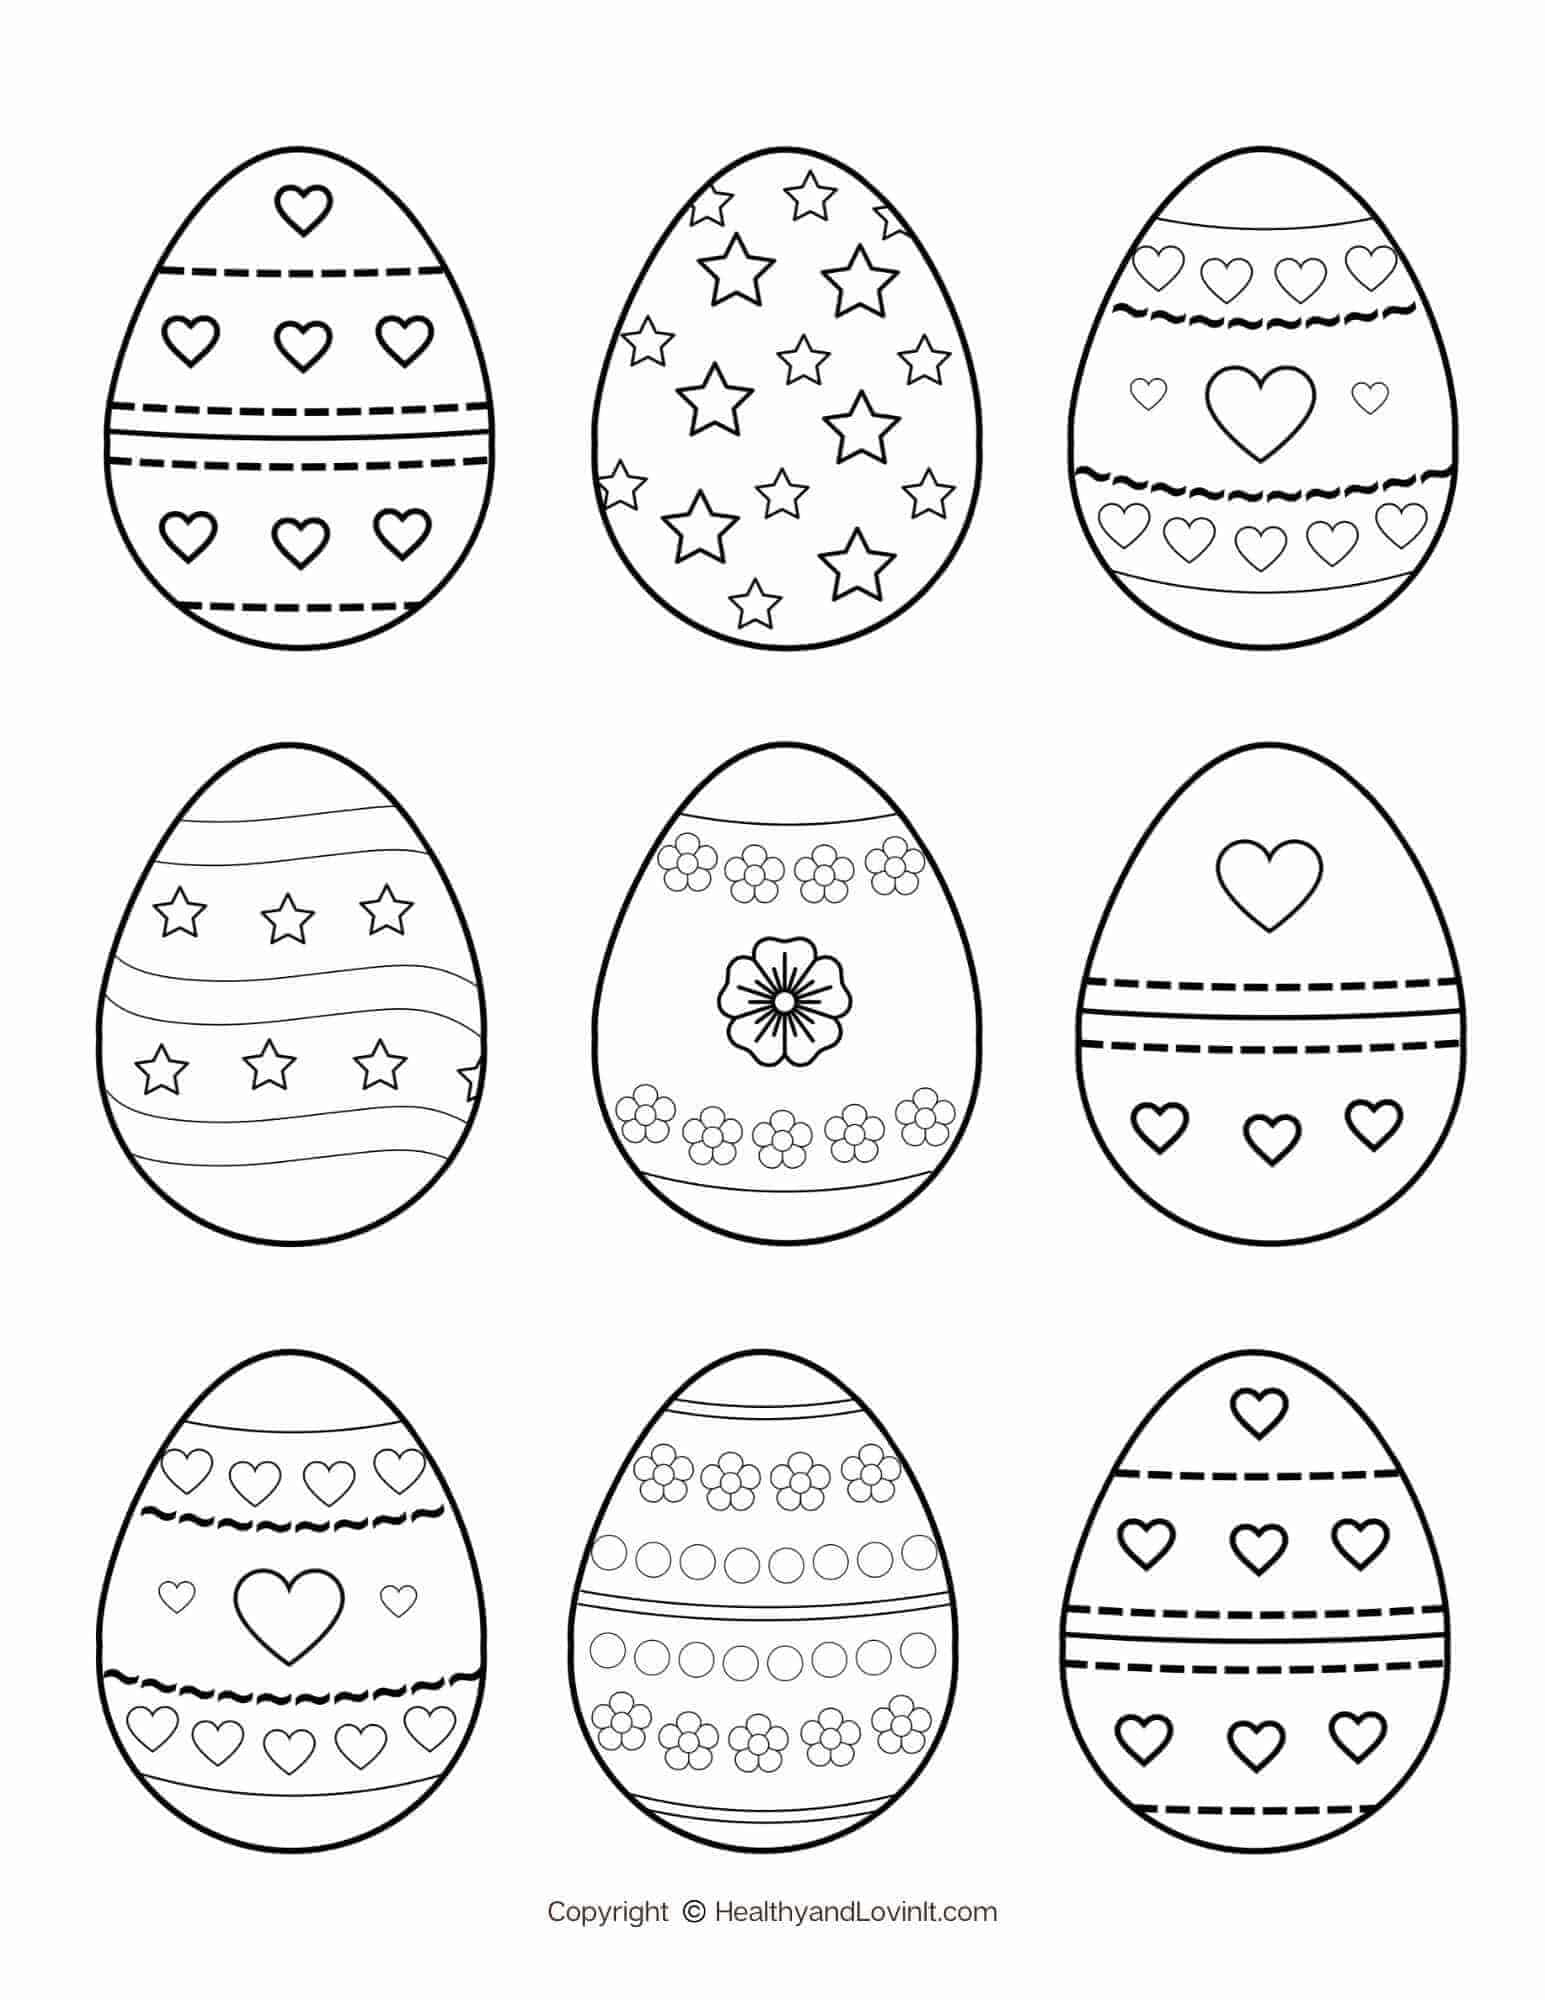 Easter Egg Coloring Pages and Templates Fun for Kids and Adults